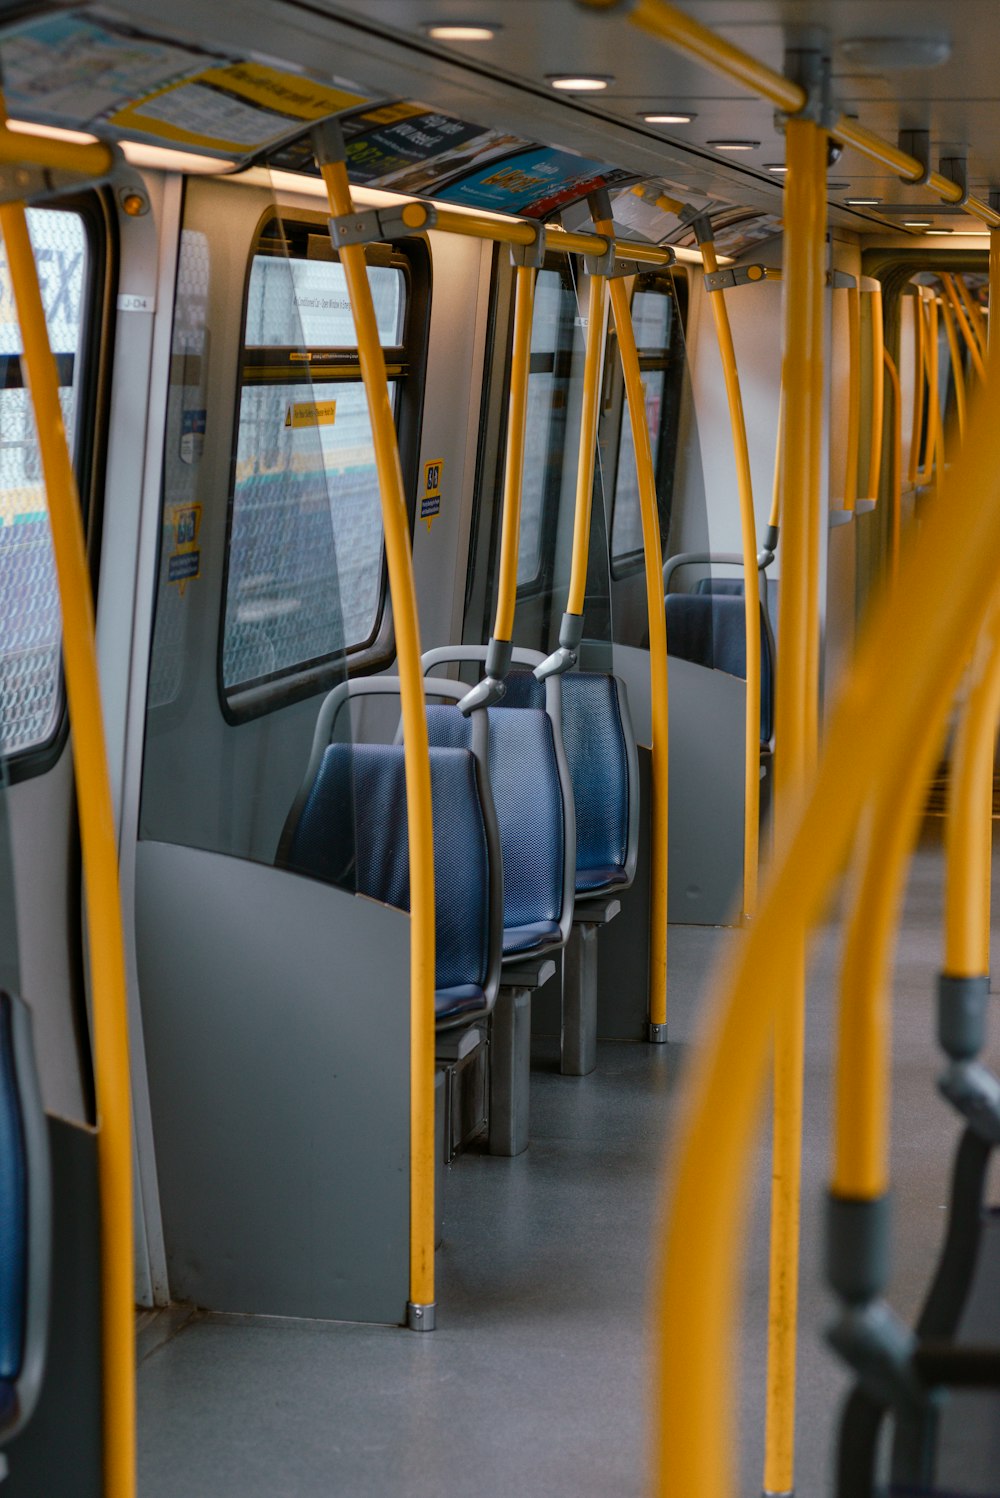 the inside of a subway car with blue and yellow seats